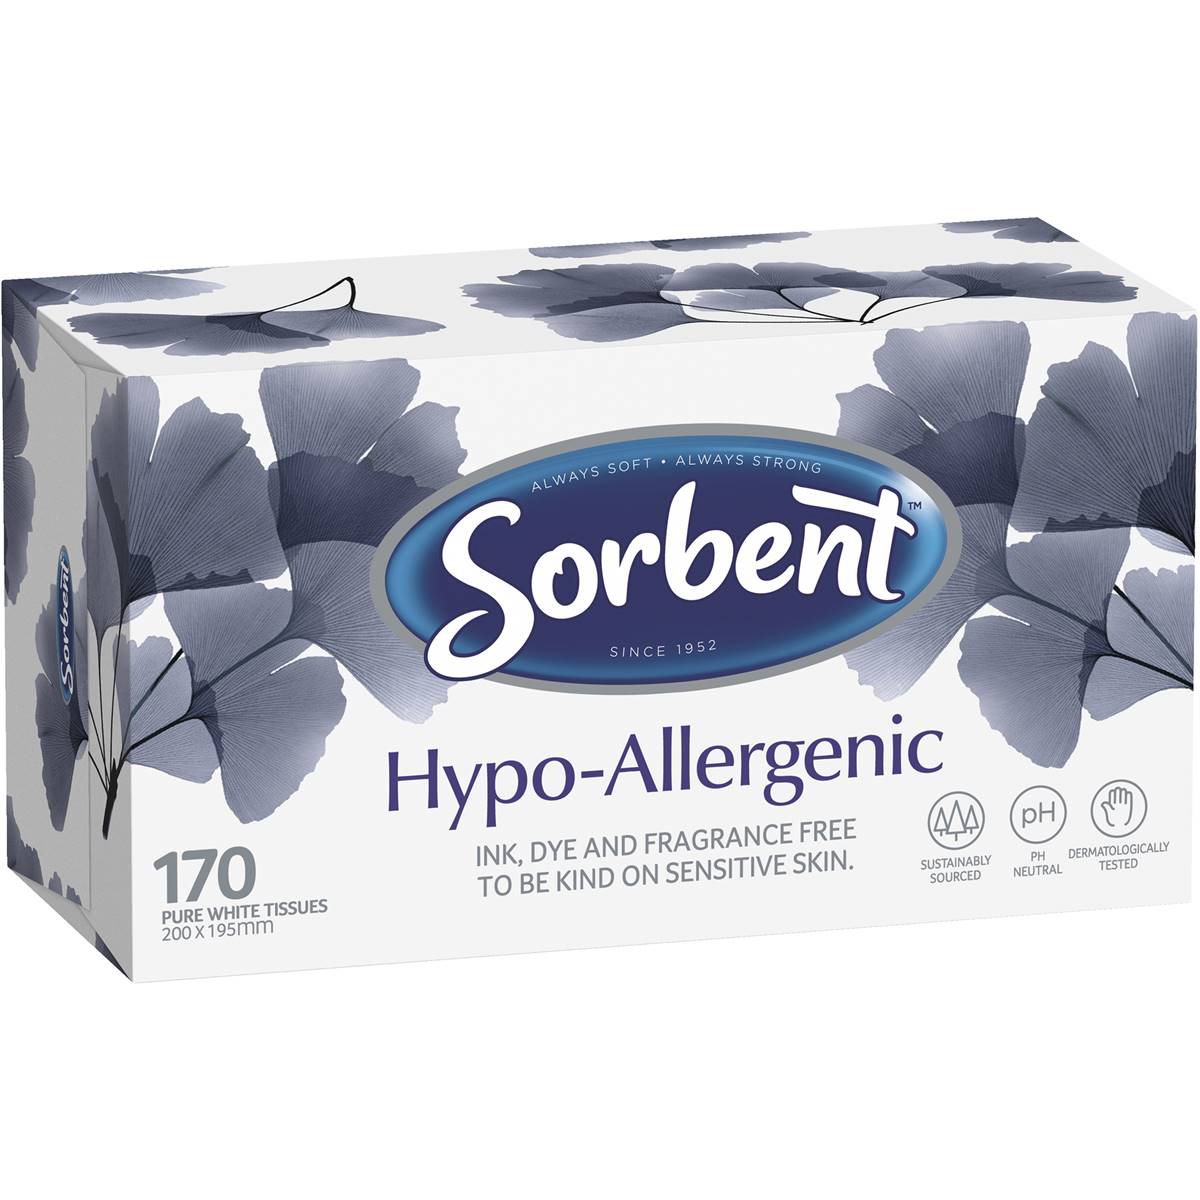 Sorbent Hypo-allergenic Pure White Tissues 170 Pack